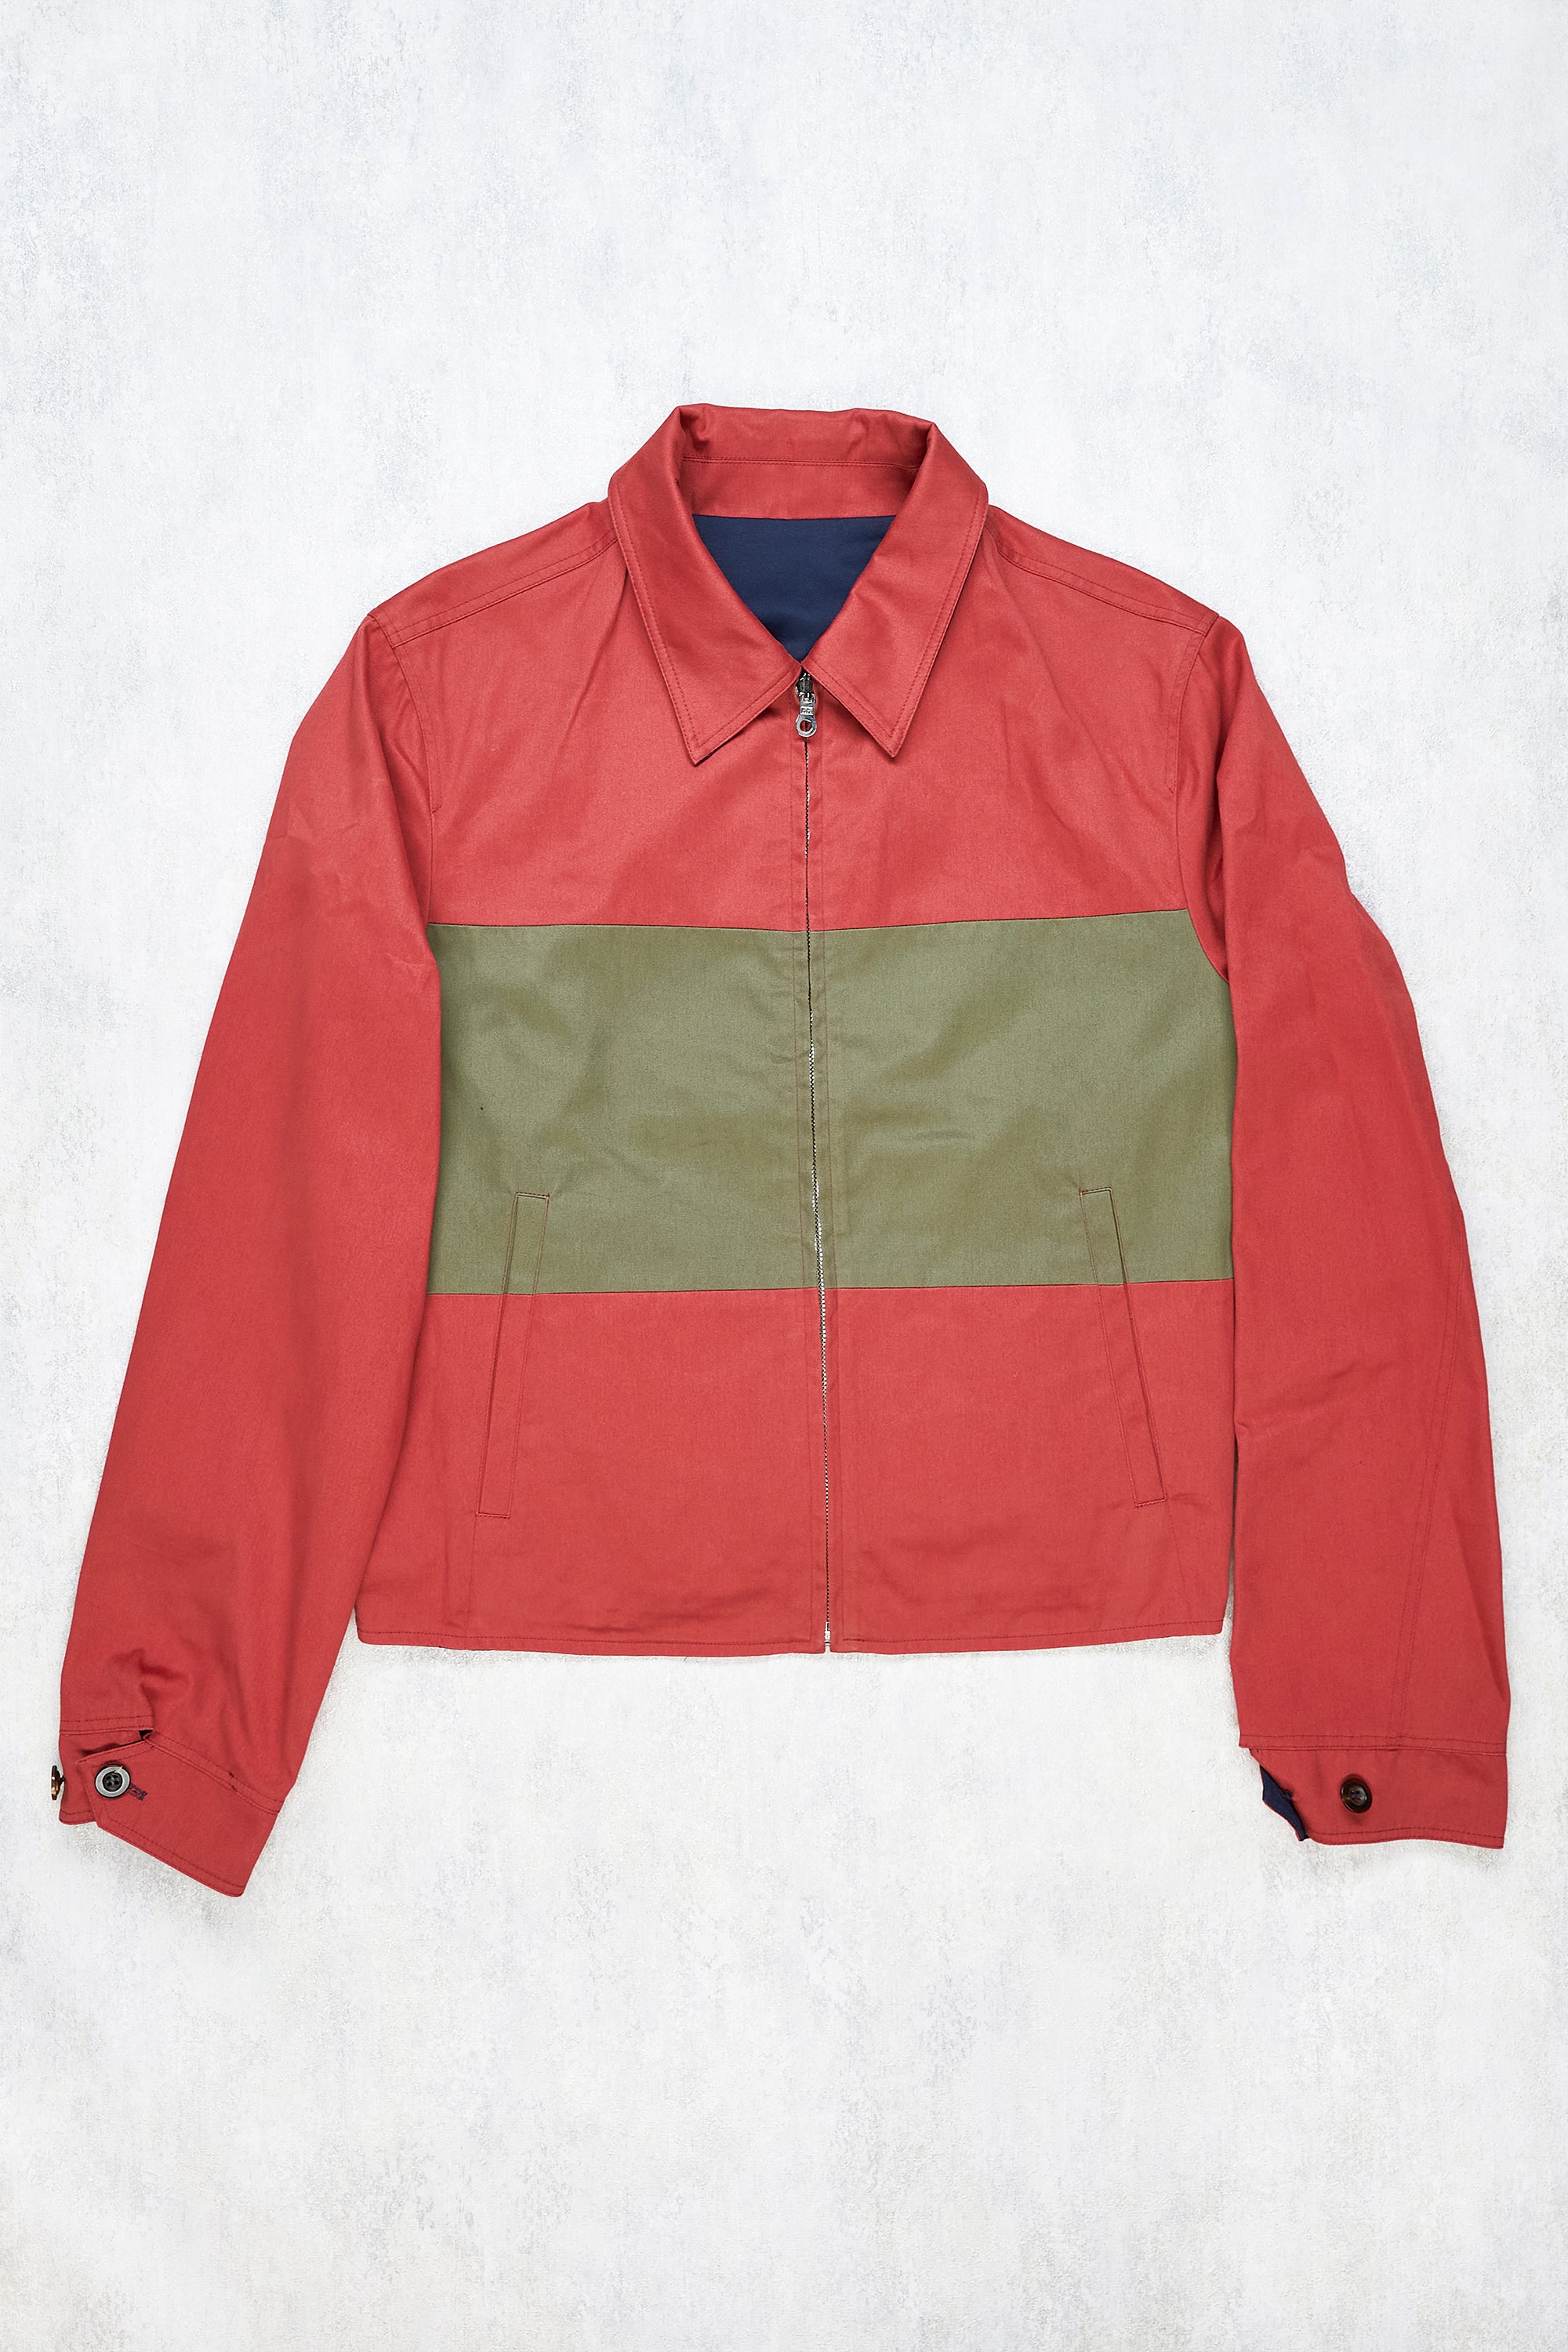 Drake's Red/Green and Navy Reverso Jacket